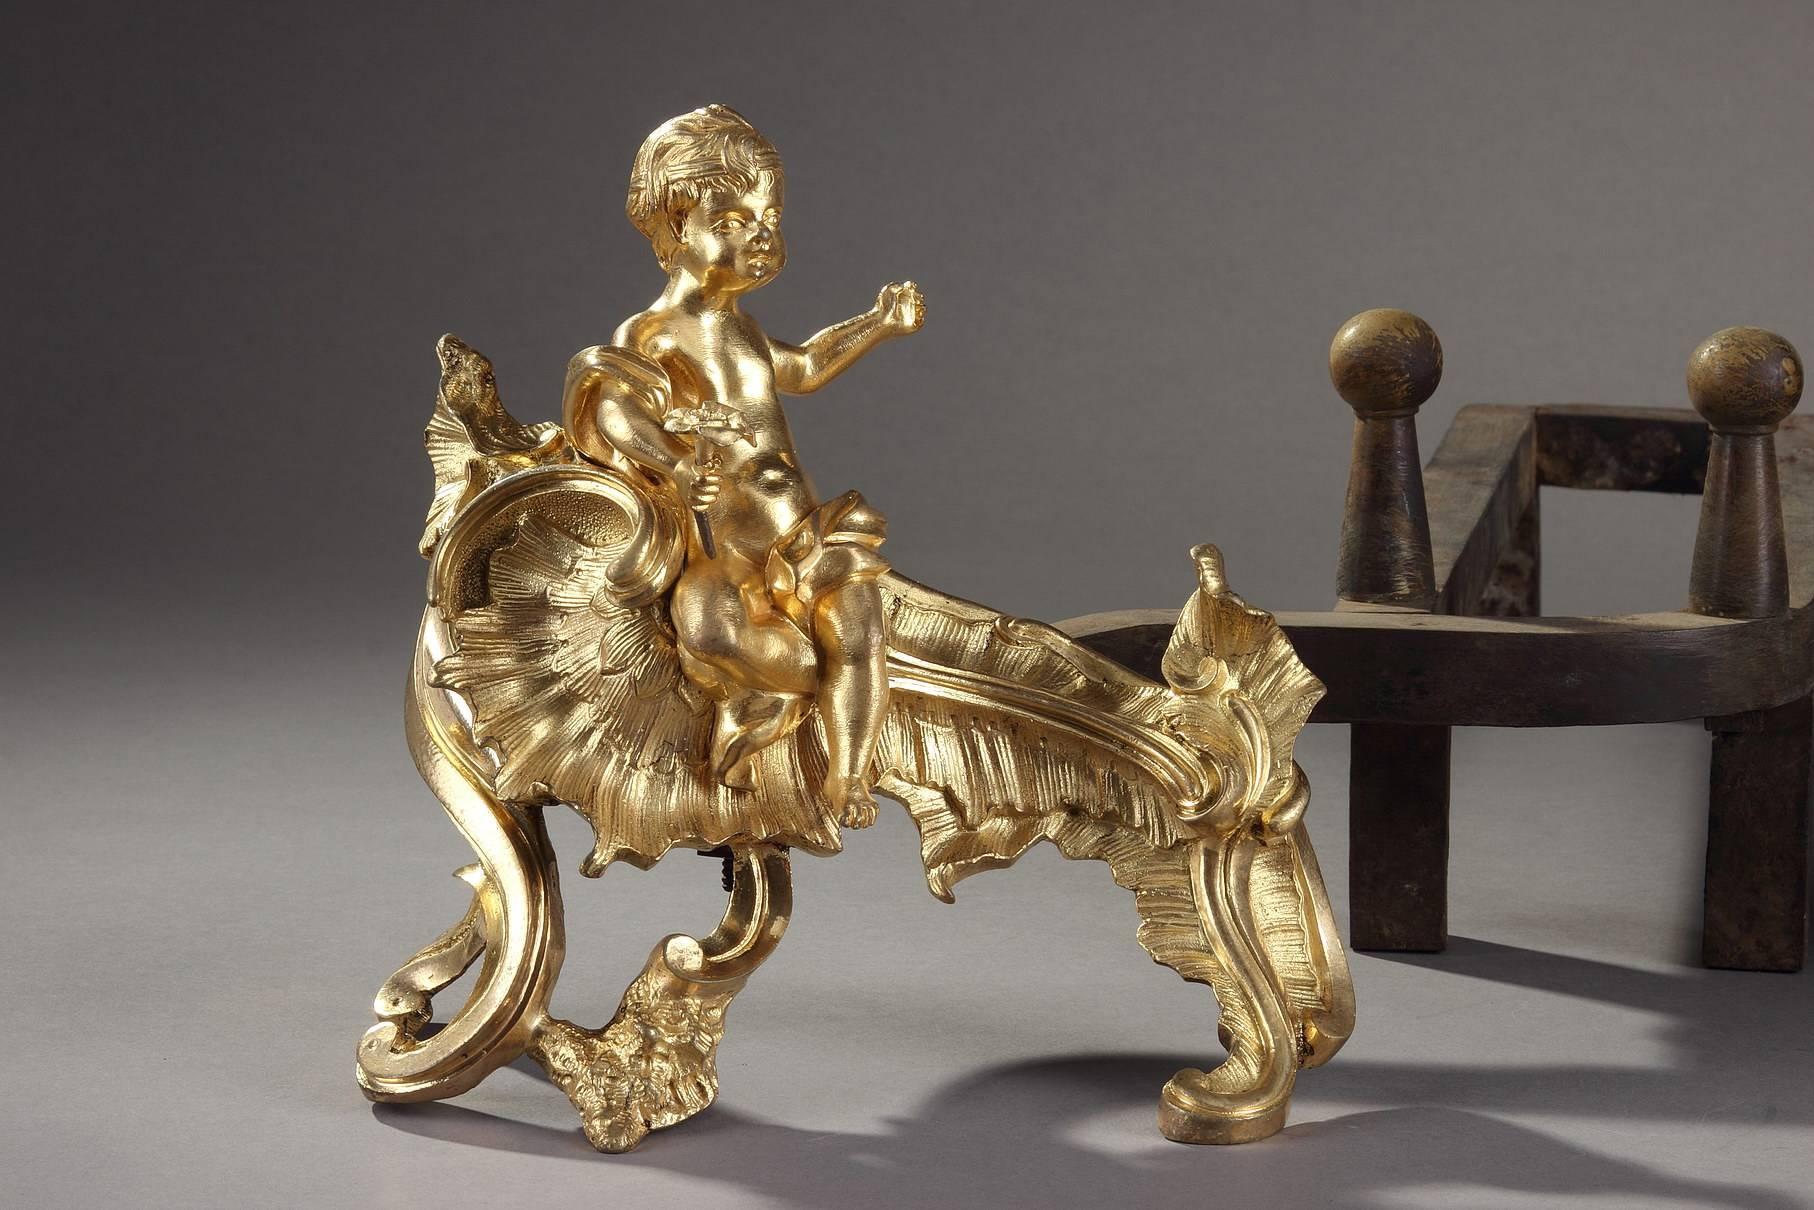 Pair of gilt and chiseled bronze andirons. They are decorated with Cupids holding a cup and a flower, sitting on a Rocaille base sculpted with gadrooned foliage and scrollwork. Louis XV period.,

circa 1760
Dimensions: W 12.6 in, D 21.3 in,  H